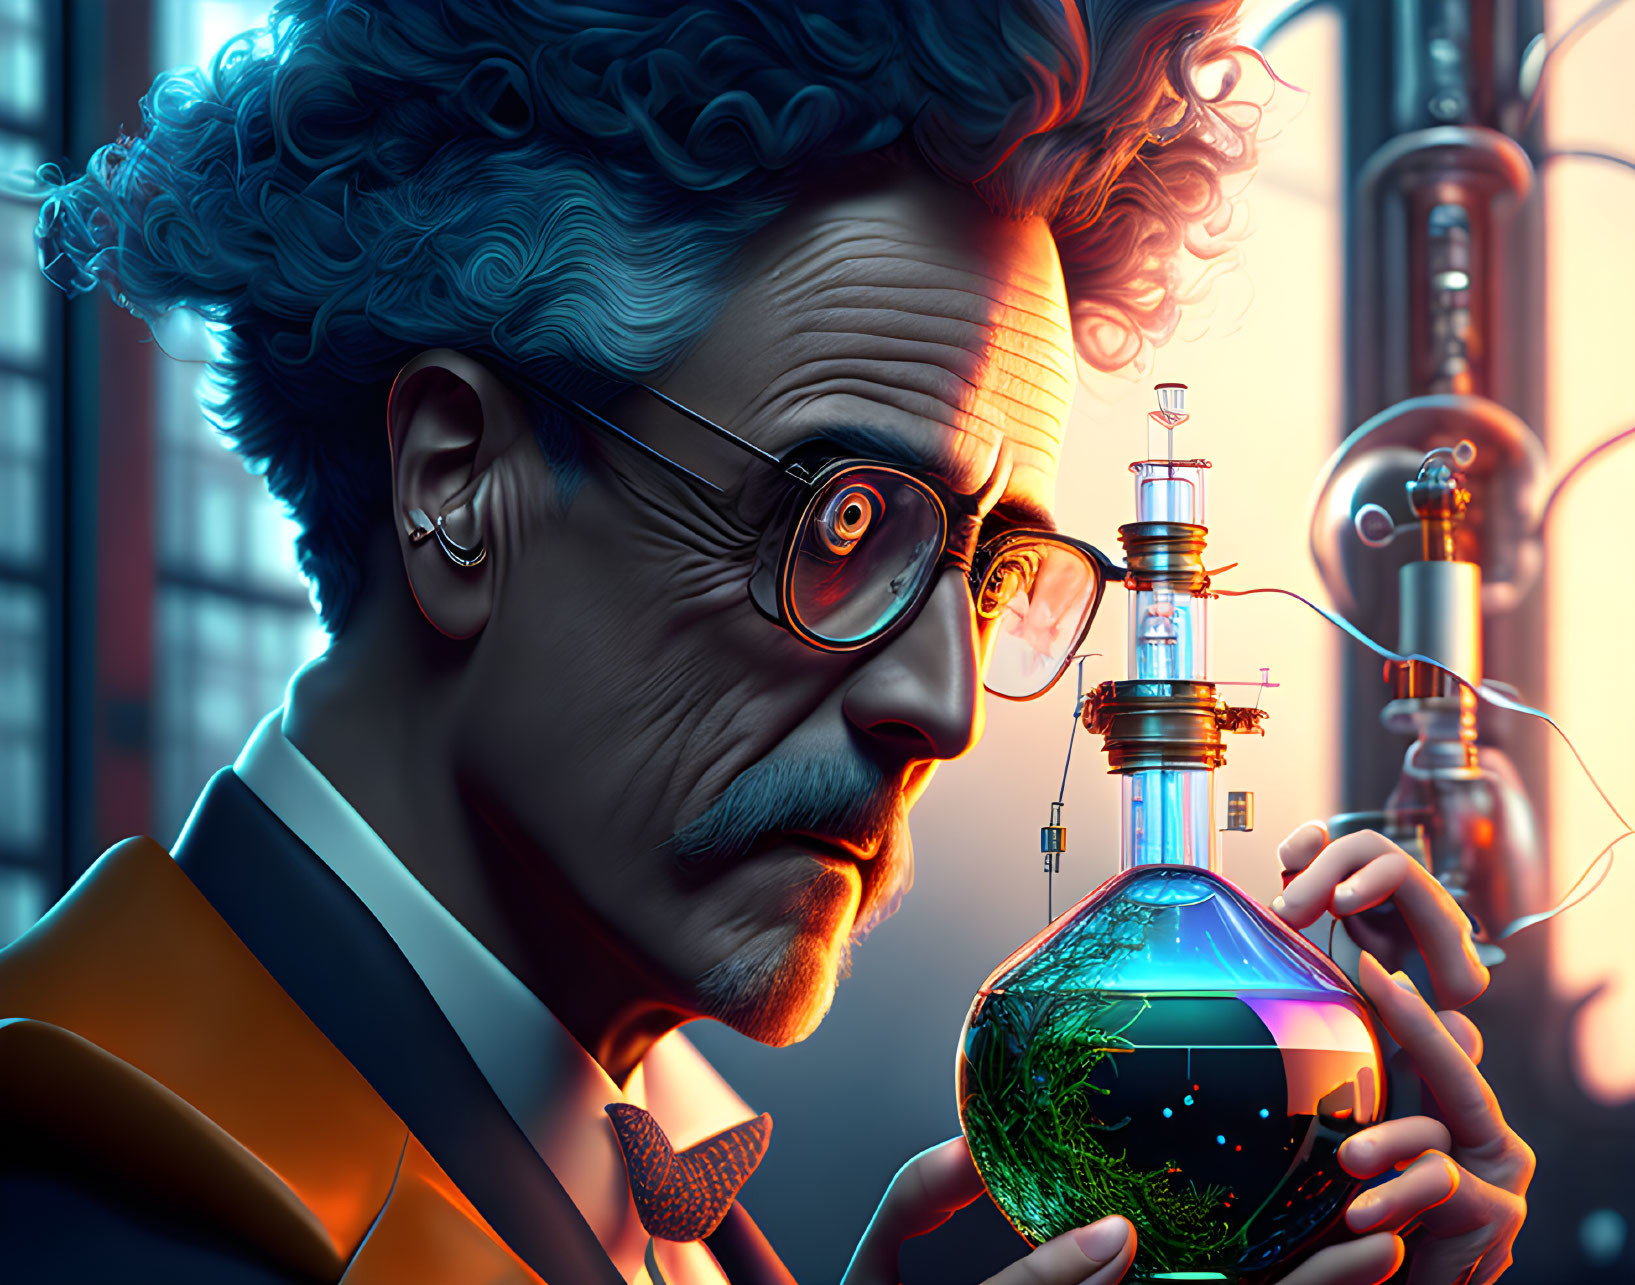 Scientist with Blue Hair and Ecosystem Flask in Colorful Illustration